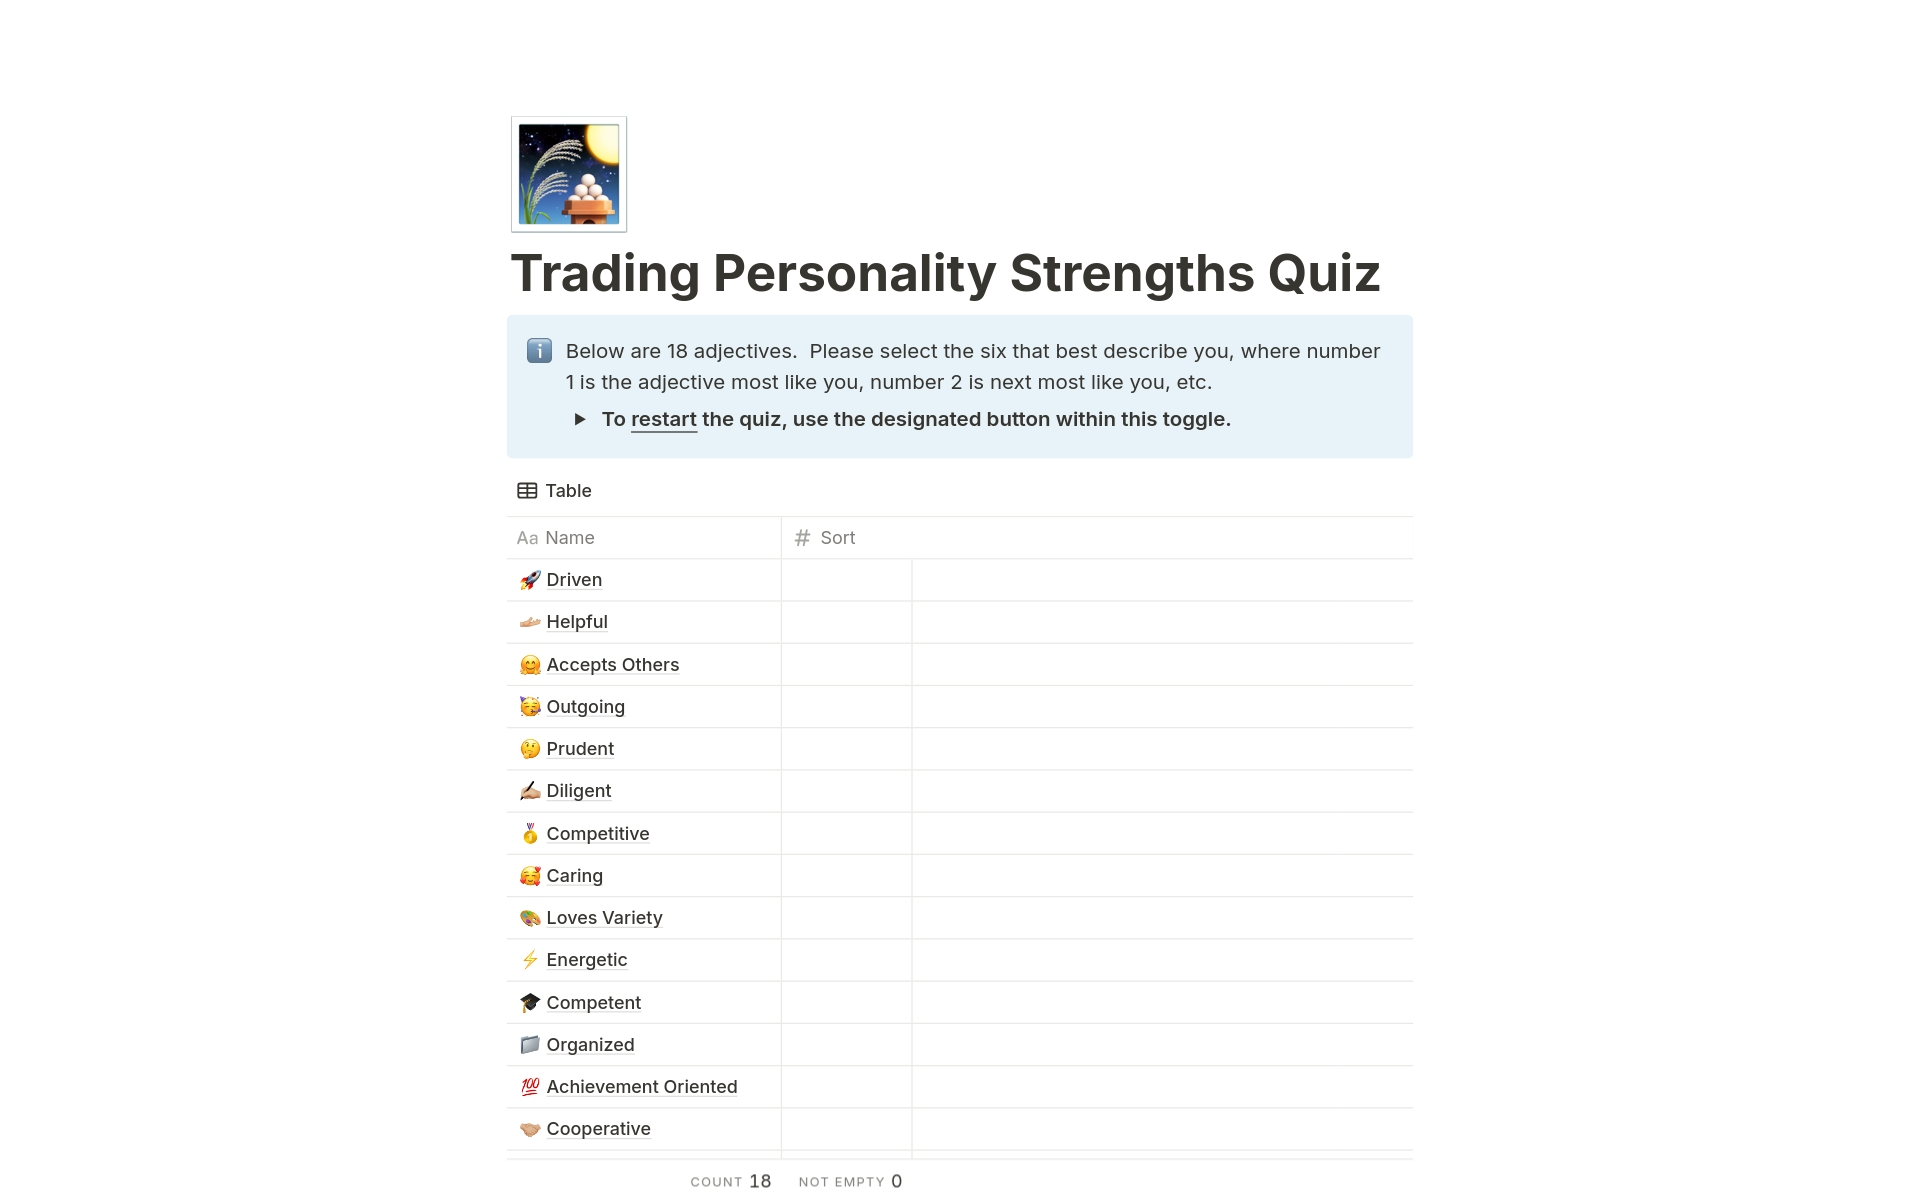 Discover your strengths! Select attributes that describe you best. Gain insights into your traits and embark on a journey of self-discovery. Based on Brett Steenbarger's work, this non-profit quiz offers a revealing look at your inner self.